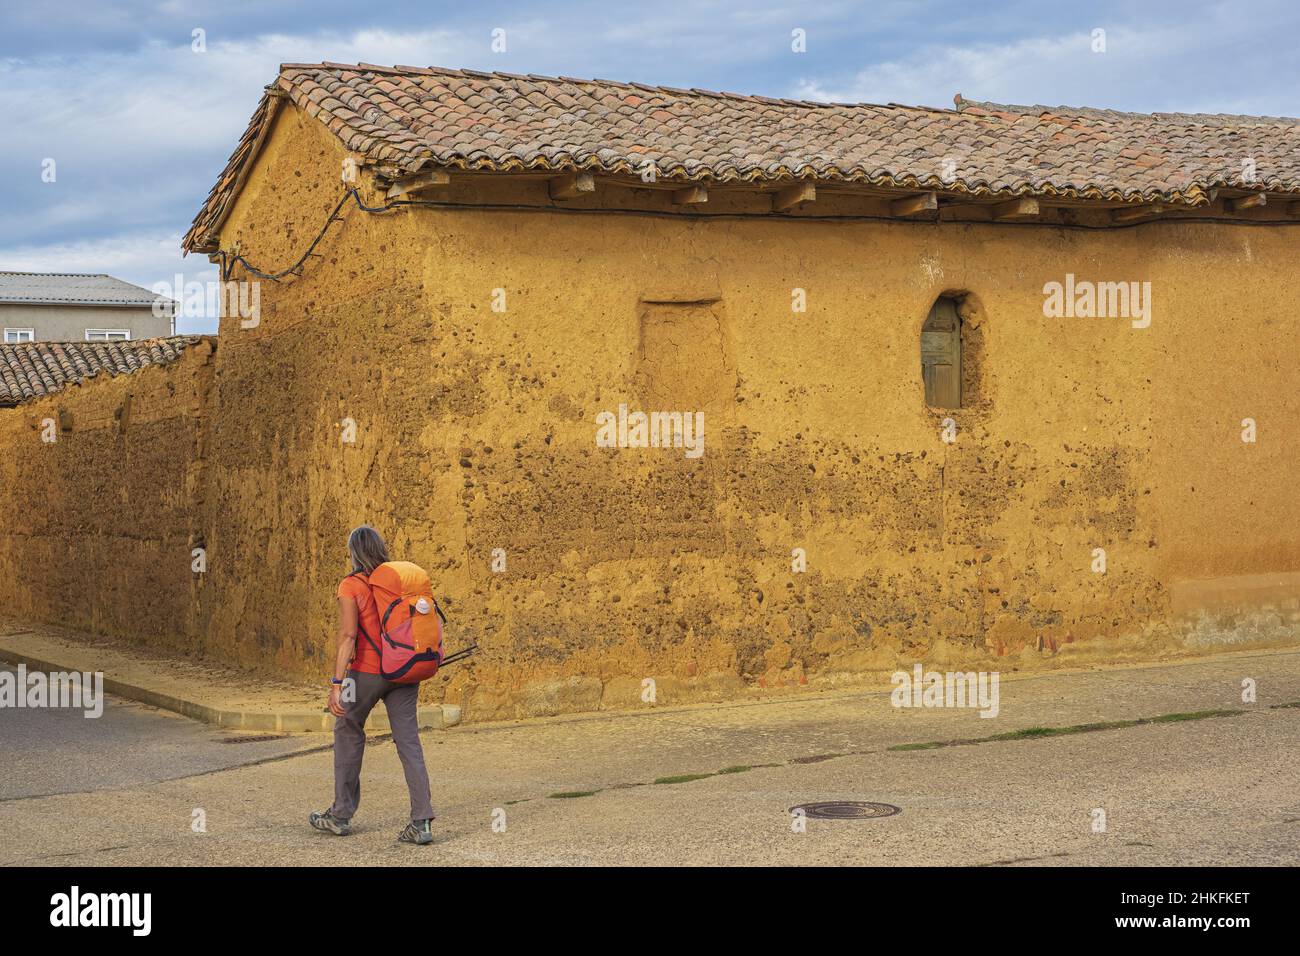 Spain, Castile and León, El Burgo Ranero, hike on the Camino Francés, Spanish route of the pilgrimage to Santiago de Compostela, listed as a UNESCO World Heritage Site, adobe house Stock Photo